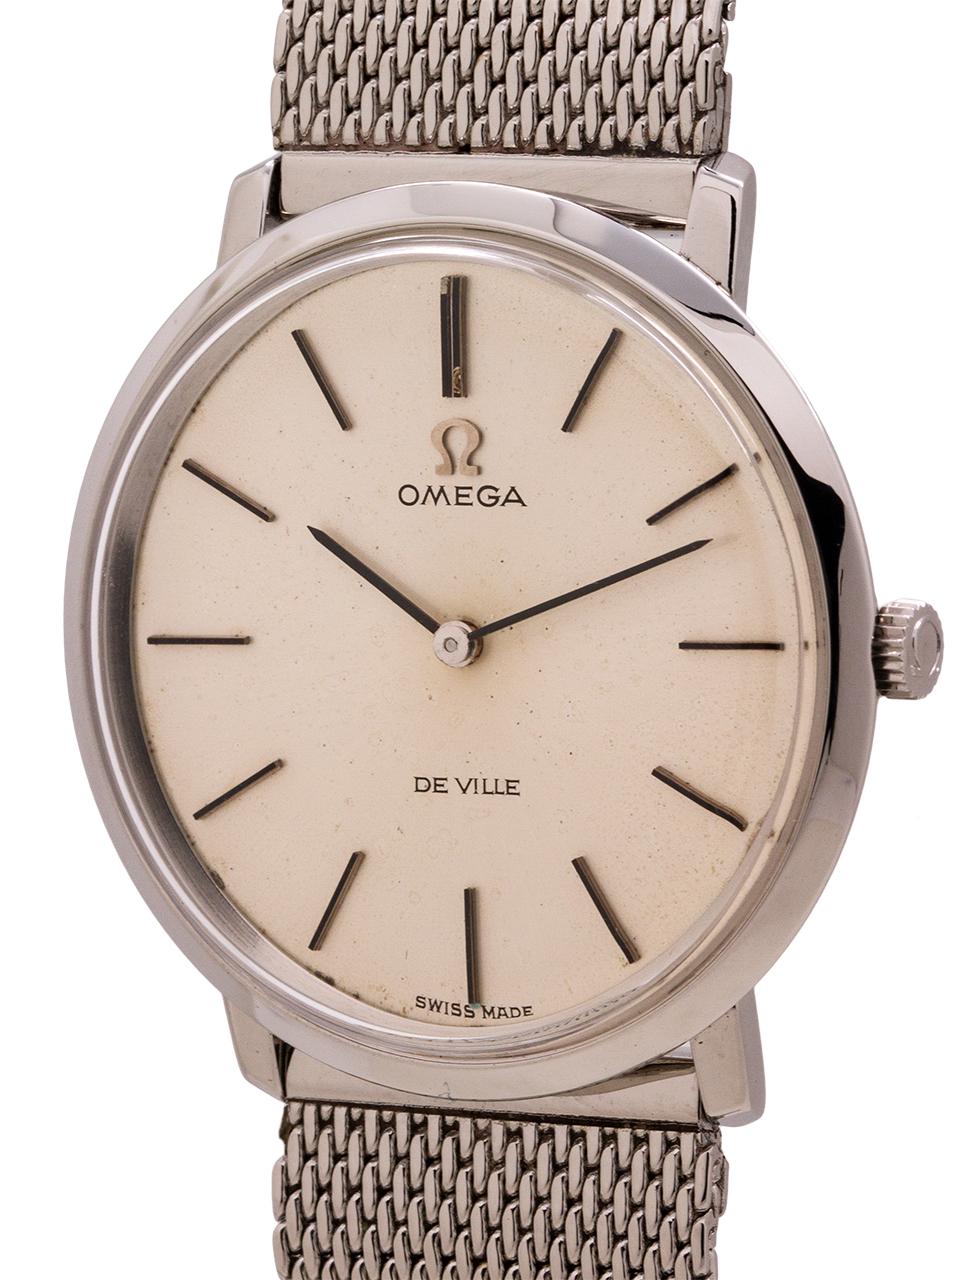 
Classic mid century design vintage man’s Omega stainless steel Deville ref # 111.077 circa 1969. Featuring a sleek and slim 33mm case with snap case back, acrylic crystal, and original matte silver dial with applied black indexes and OMEGA logo,